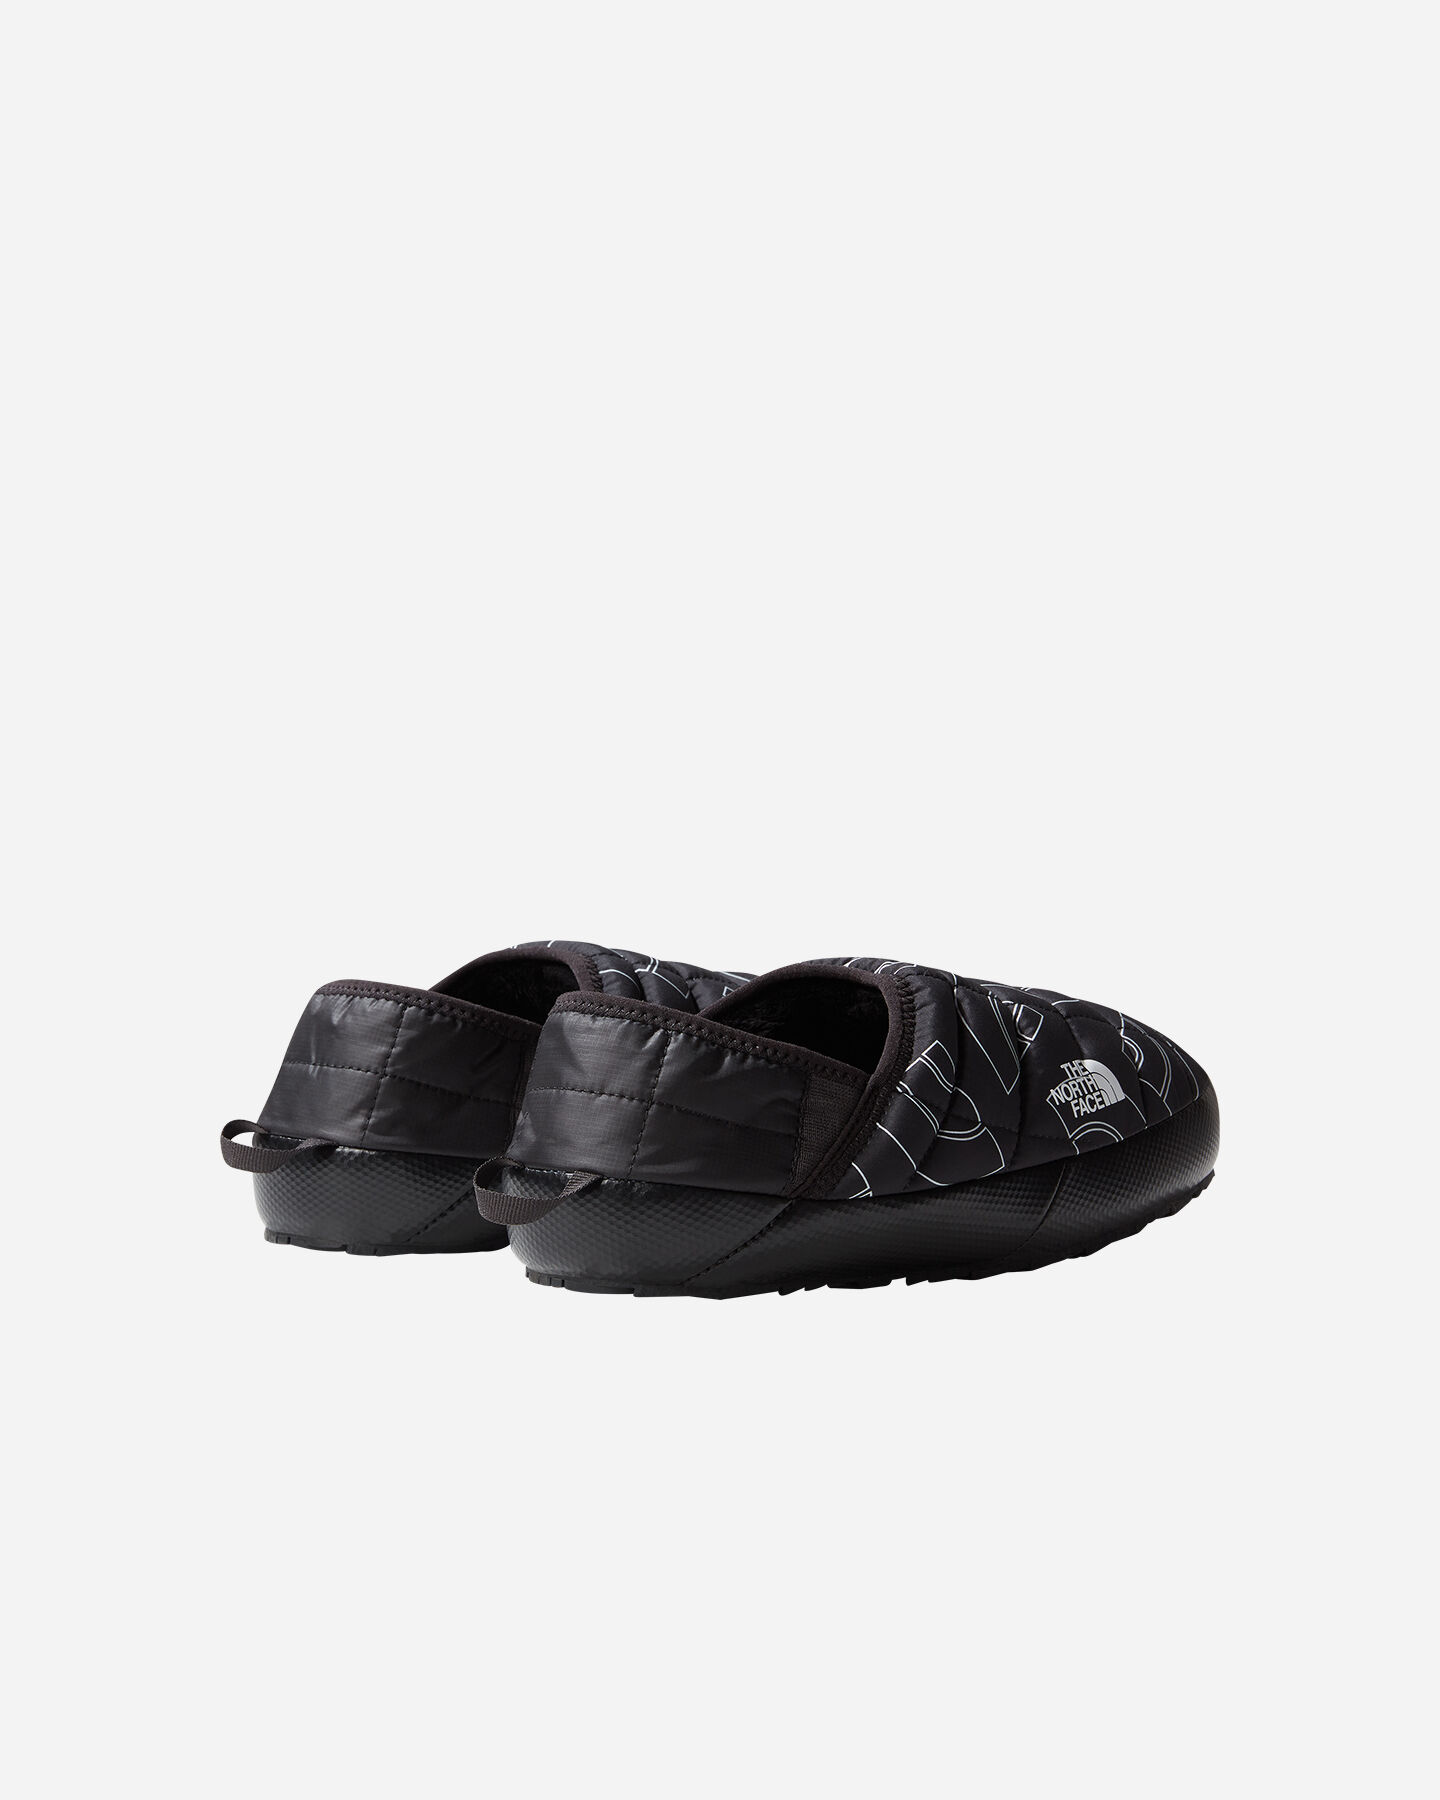  Ciabatte THE NORTH FACE THERMOBALL TRACTION MULE V M S5597595|OJS|7 scatto 4